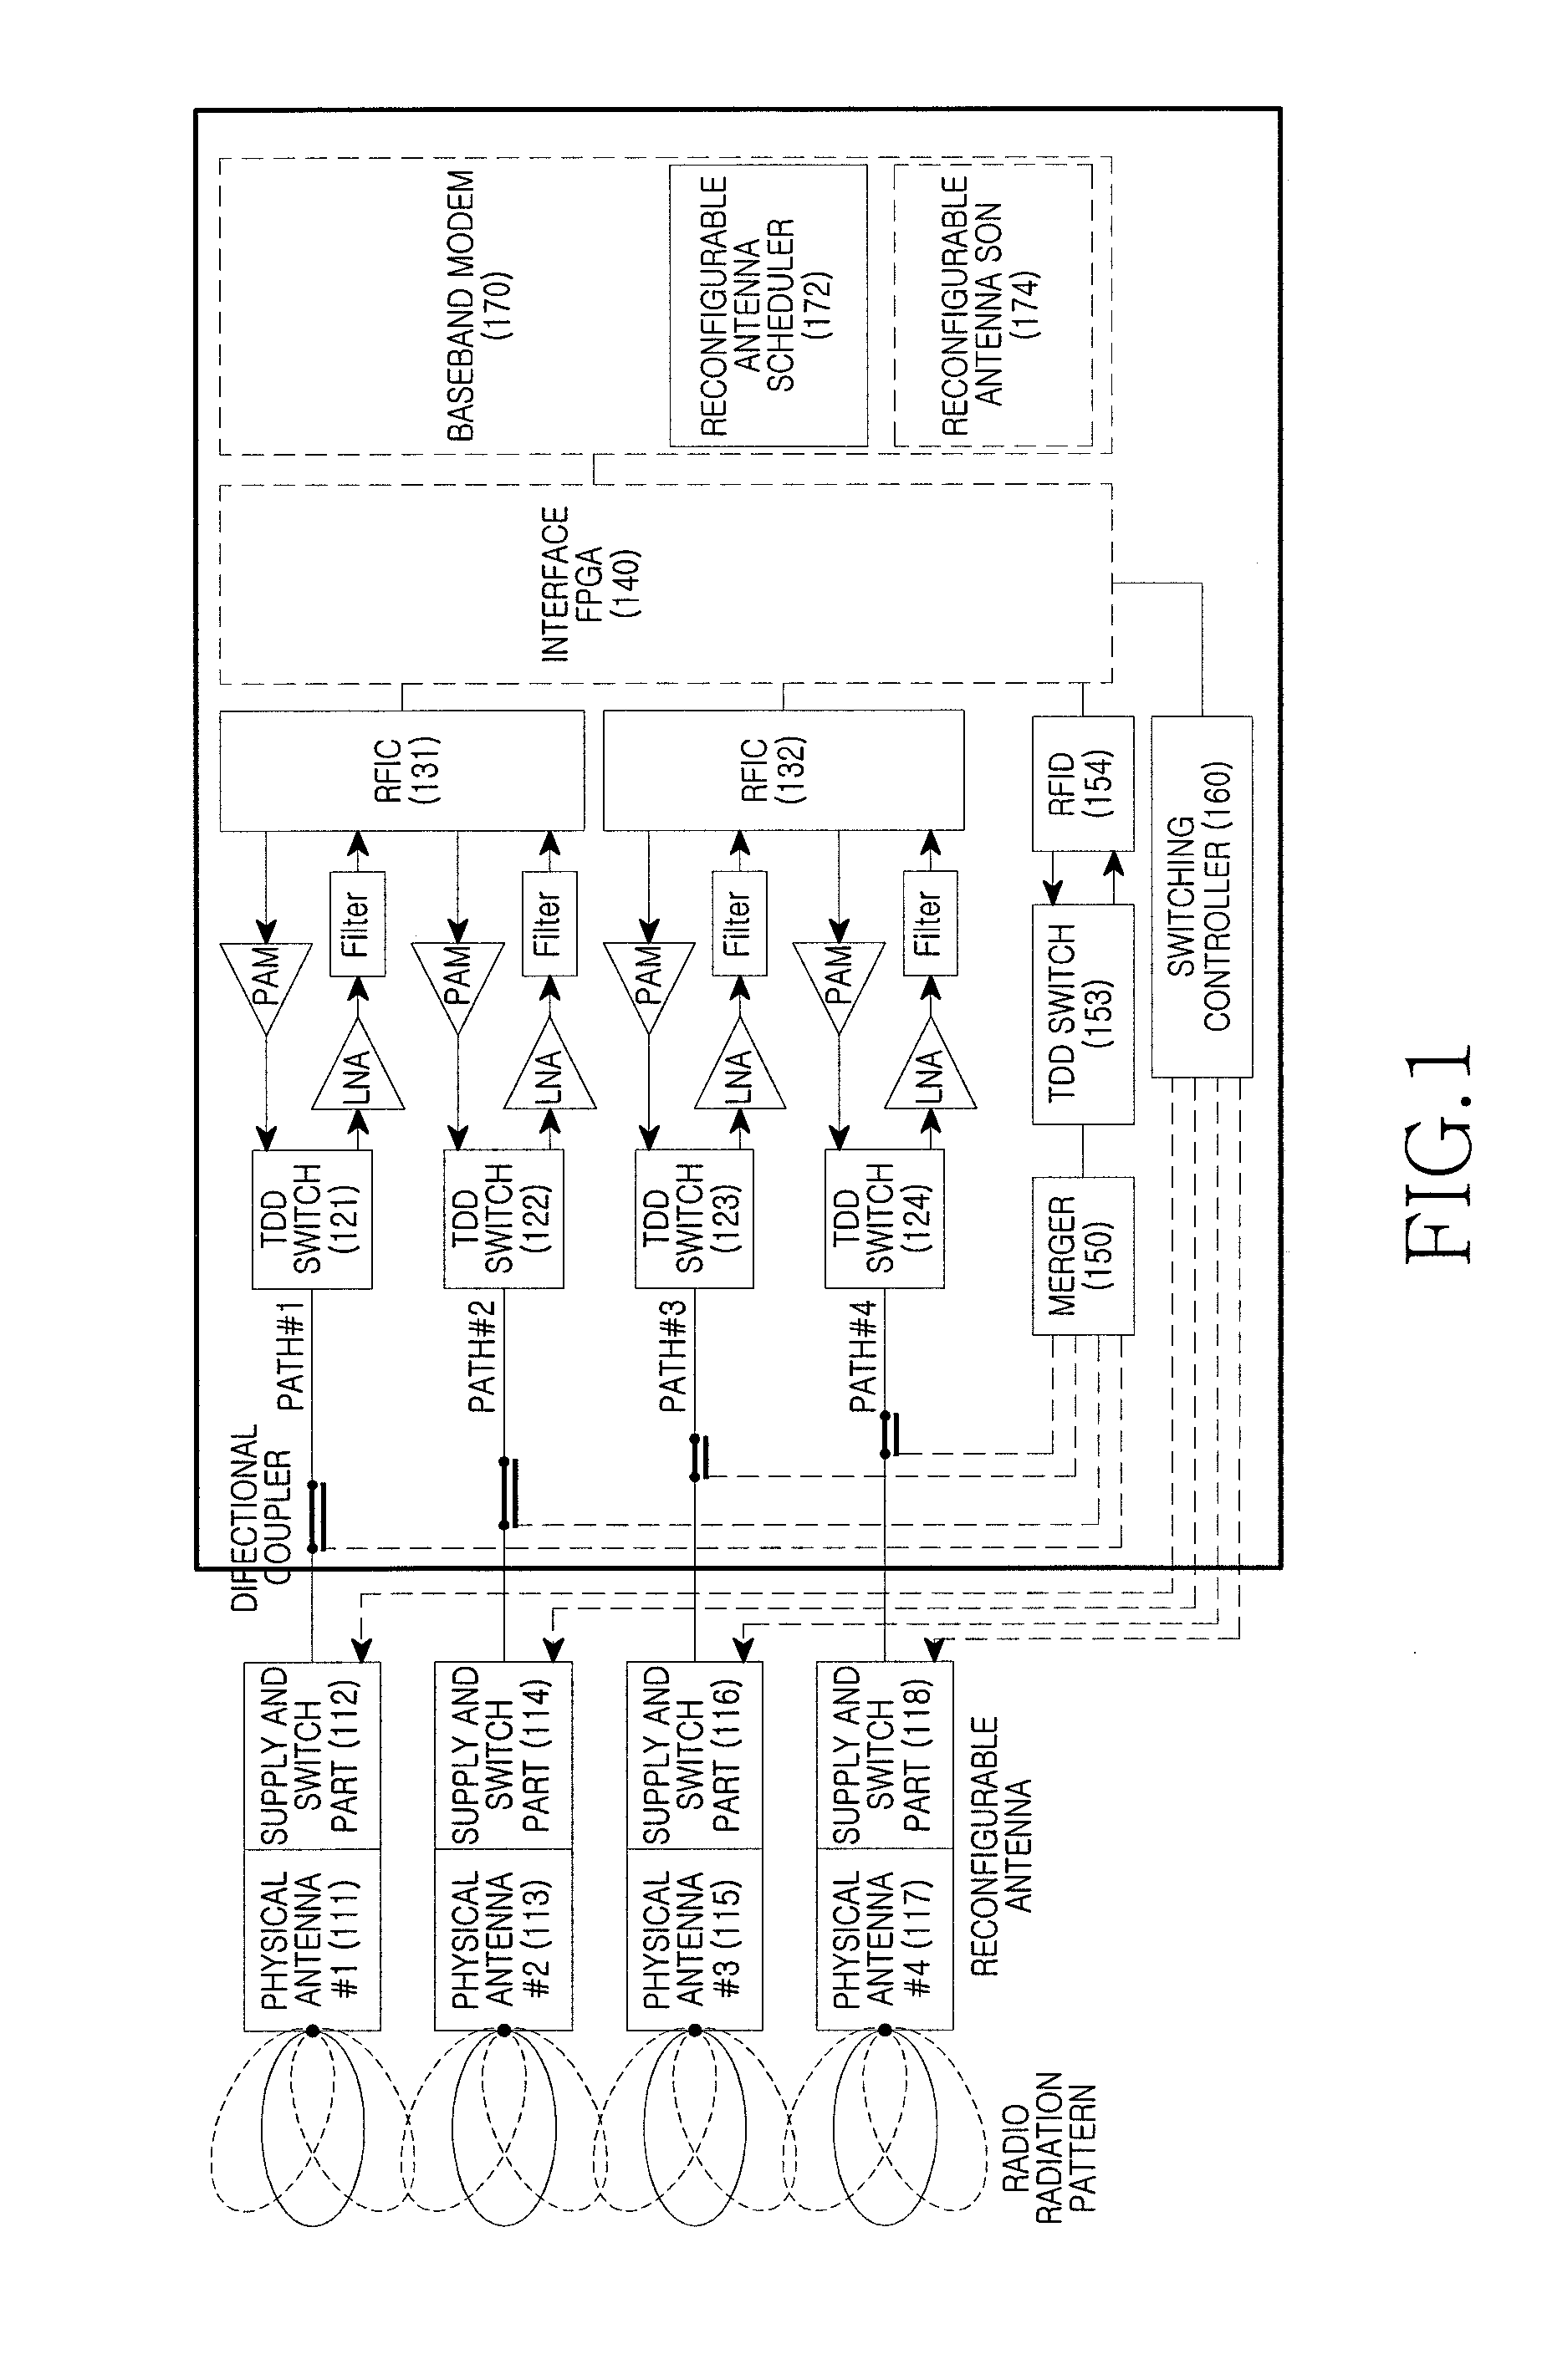 Method and apparatus for down link interference cancelation between adjacent base stations in base station with reconfigurable antenna